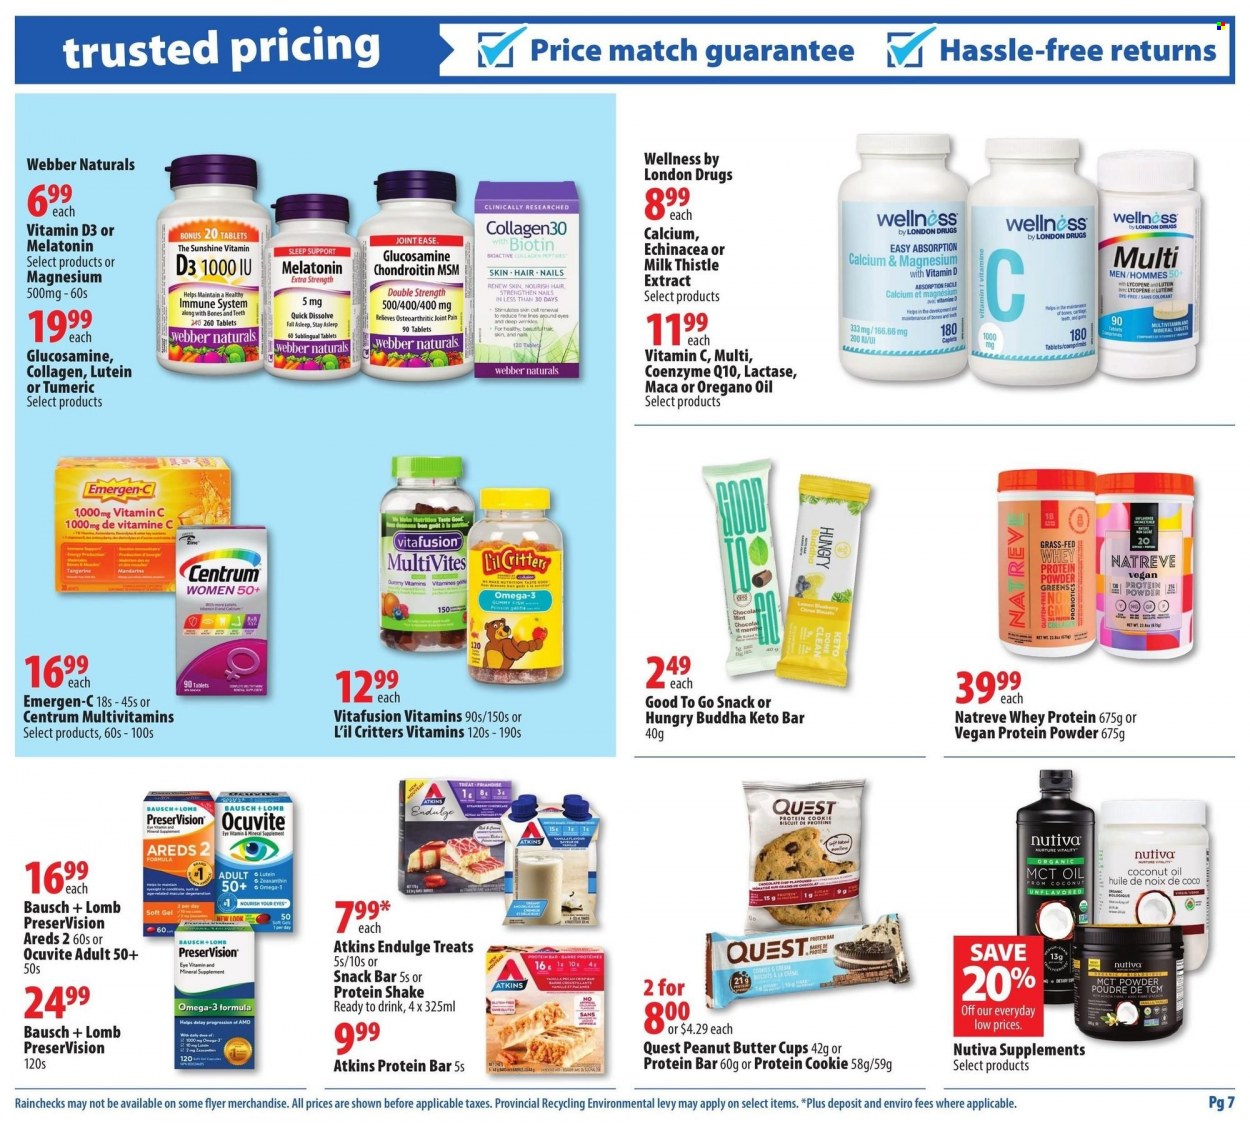 thumbnail - London Drugs Flyer - January 14, 2022 - January 19, 2022 - Sales products - tablet, chocolate, protein cookie, peanut butter cups, snack bar, protein bar, Biotin, glucosamine, magnesium, multivitamin, Vitafusion, vitamin c, Omega-3, Emergen-C, whey protein, vitamin D3, Centrum, calcium, Ocuvite. Page 7.